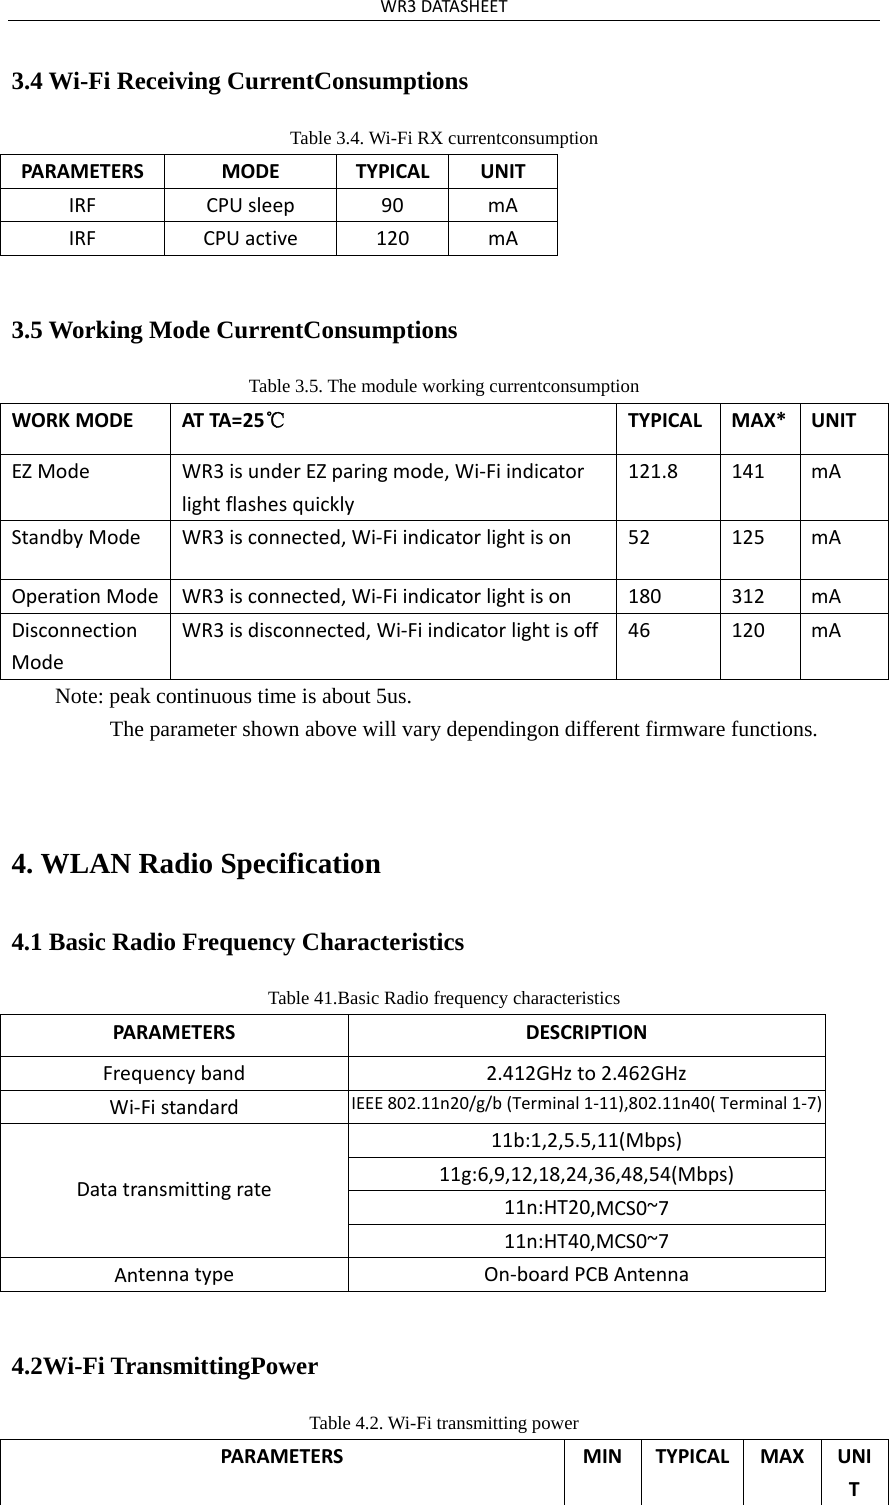 WR3DATASHEET3.4 Wi-Fi Receiving CurrentConsumptions Table 3.4. Wi-Fi RX currentconsumption PARAMETERSMODETYPICALUNITIRFCPUsleep90mAIRFCPUactive120mA3.5 Working Mode CurrentConsumptions Table 3.5. The module working currentconsumption WORKMODEATTA =2 5 ℃TYPICALMAX*UNITEZModeWR3isunderEZparingmode,Wi‐Fiindicatorlightflashesquickly121.8141mAStandbyModeWR3isconnected,Wi‐Fiindicatorlightison52125mAOperationModeWR3isconnected,Wi‐Fiindicatorlightison180312mADisconnectionModeWR3isdisconnected,Wi‐Fiindicatorlightisoff 46120mANote: peak continuous time is about 5us. The parameter shown above will vary dependingon different firmware functions. 4. WLAN Radio Specification4.1 Basic Radio Frequency Characteristics Table 41.Basic Radio frequency characteristics PARAMETERSDESCRIPTIONFrequencyband2.412GHzto2.462GHzWi‐FistandardIEEE802.11n20/g/b(Terminal1‐11),802.11n40(Terminal 1-7)Datatransmittingrate11b:1,2,5.5,11(Mbps)11g:6,9,12,18,24,36,48,54(Mbps)11n:HT20,MCS0~711n:HT40,MCS0~7AntennatypeOn‐boardPCBAntenna4.2Wi-Fi TransmittingPower Table 4.2. Wi-Fi transmitting power PARAMETERSMIN TYPICALMAXUNIT